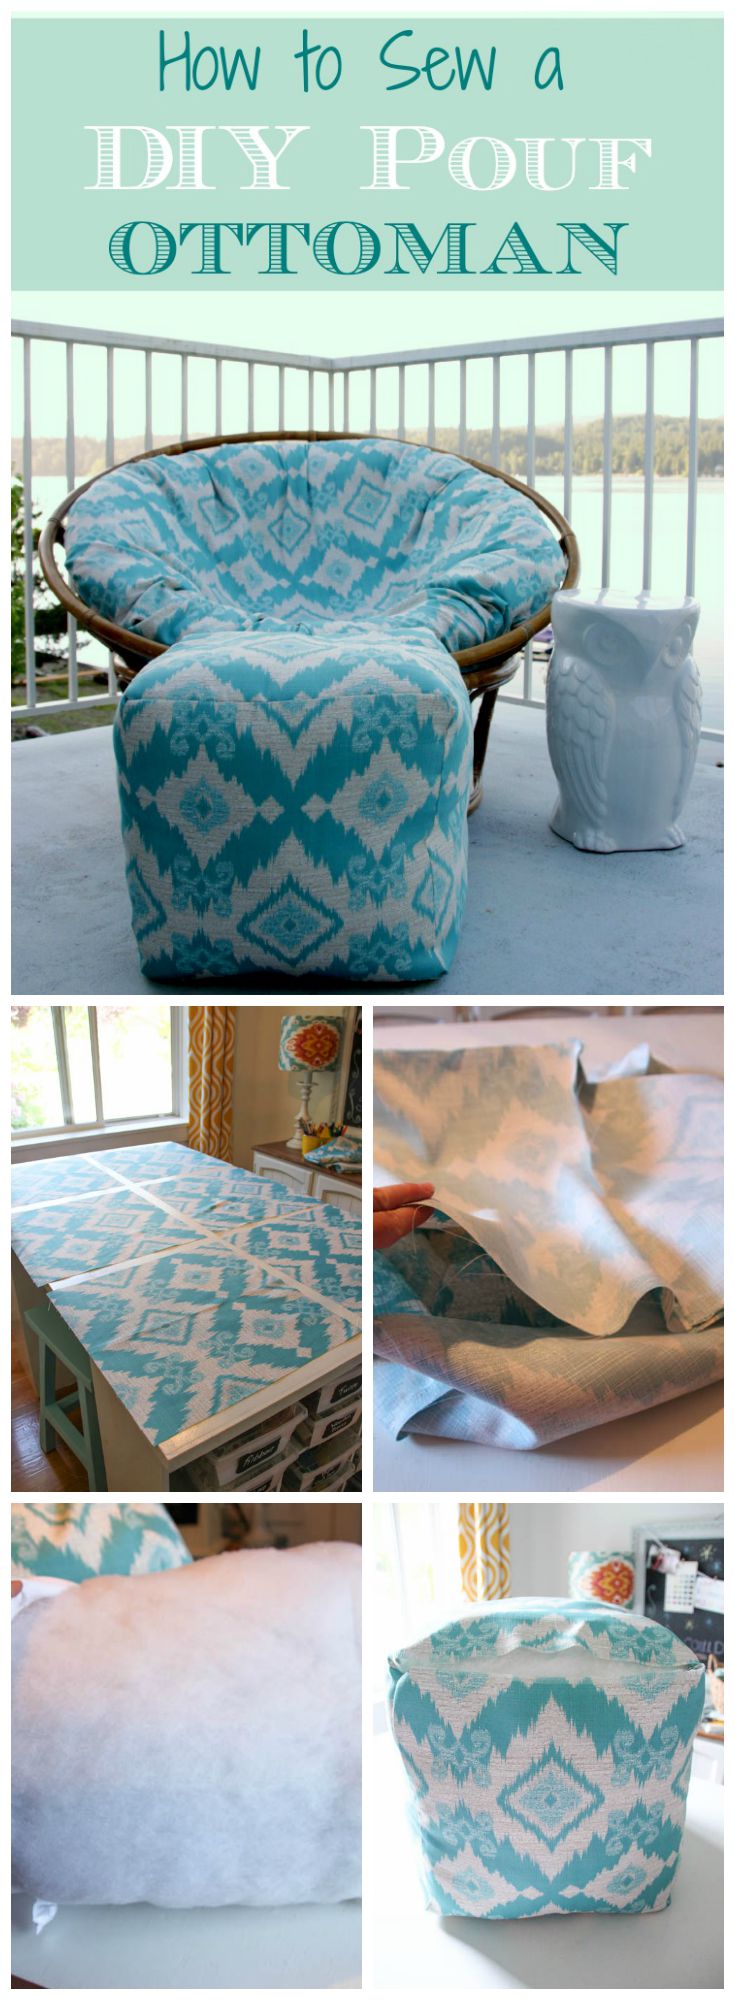 How to sew a DIY pouf ottoman poster.